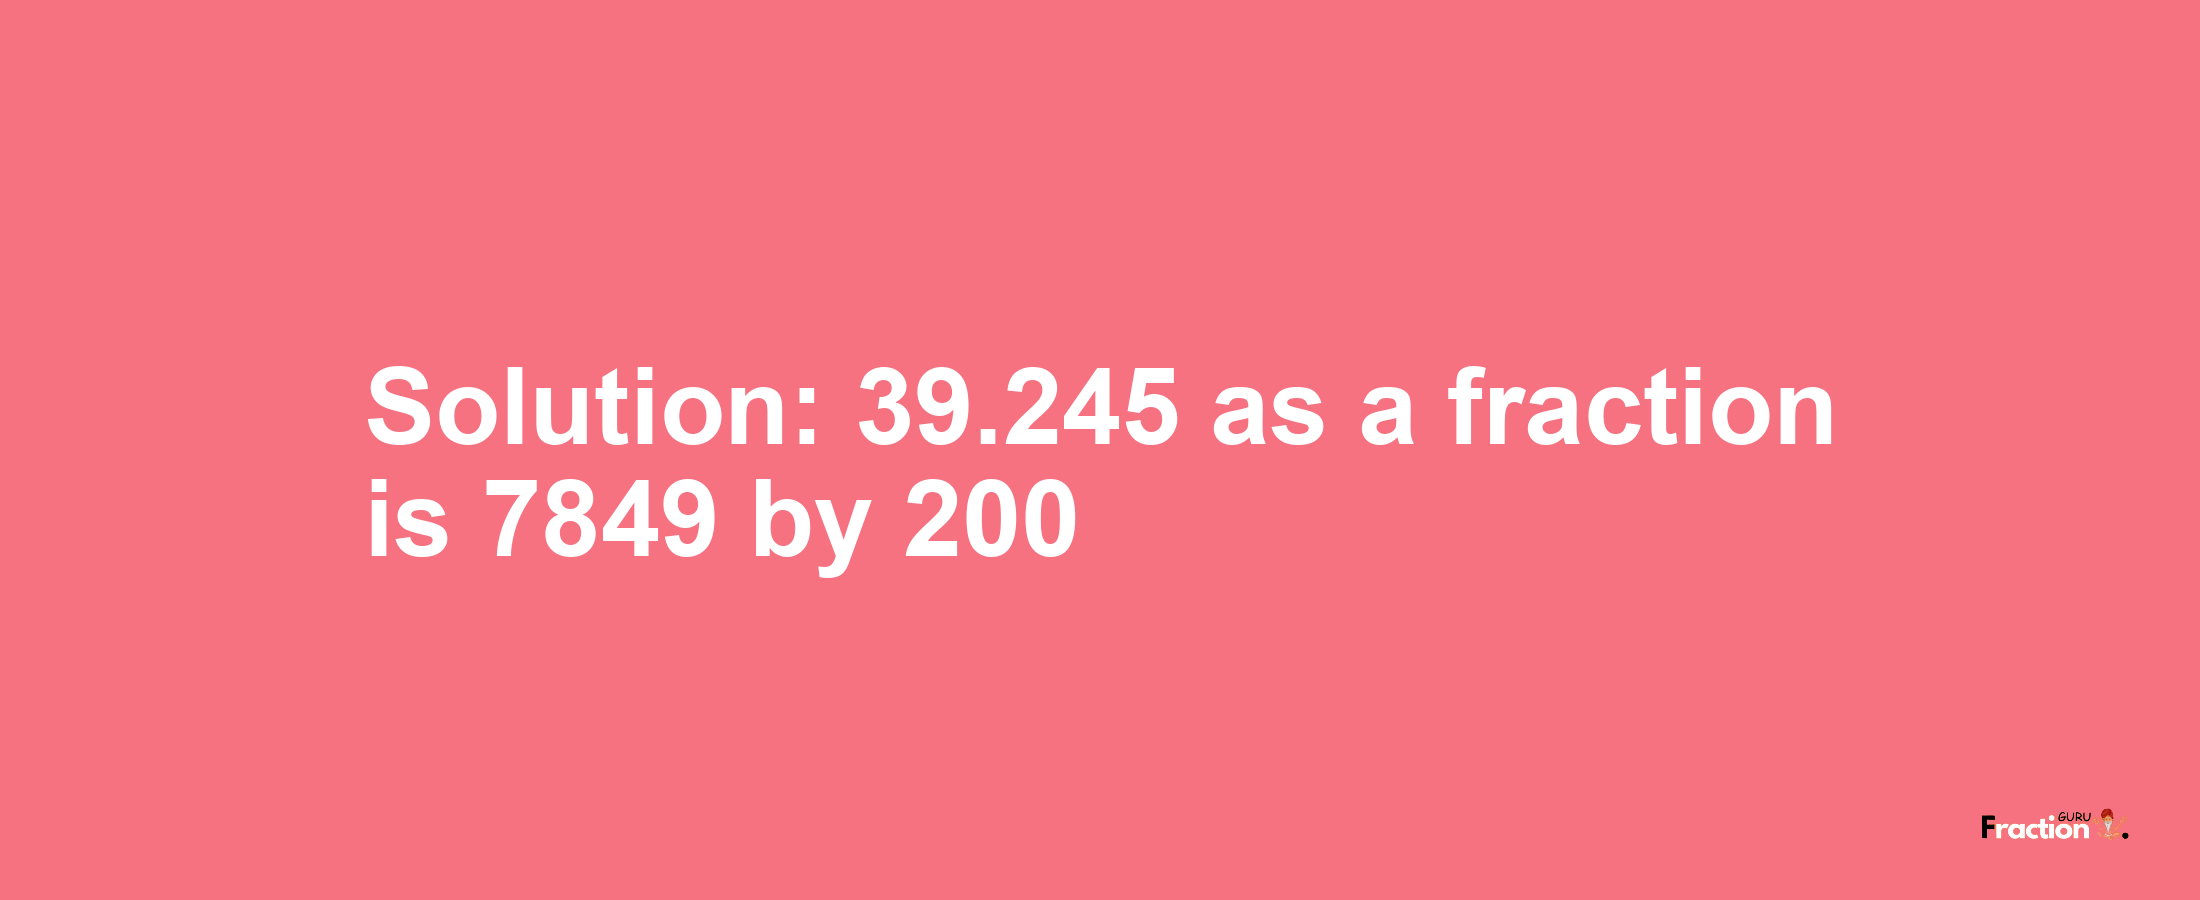 Solution:39.245 as a fraction is 7849/200